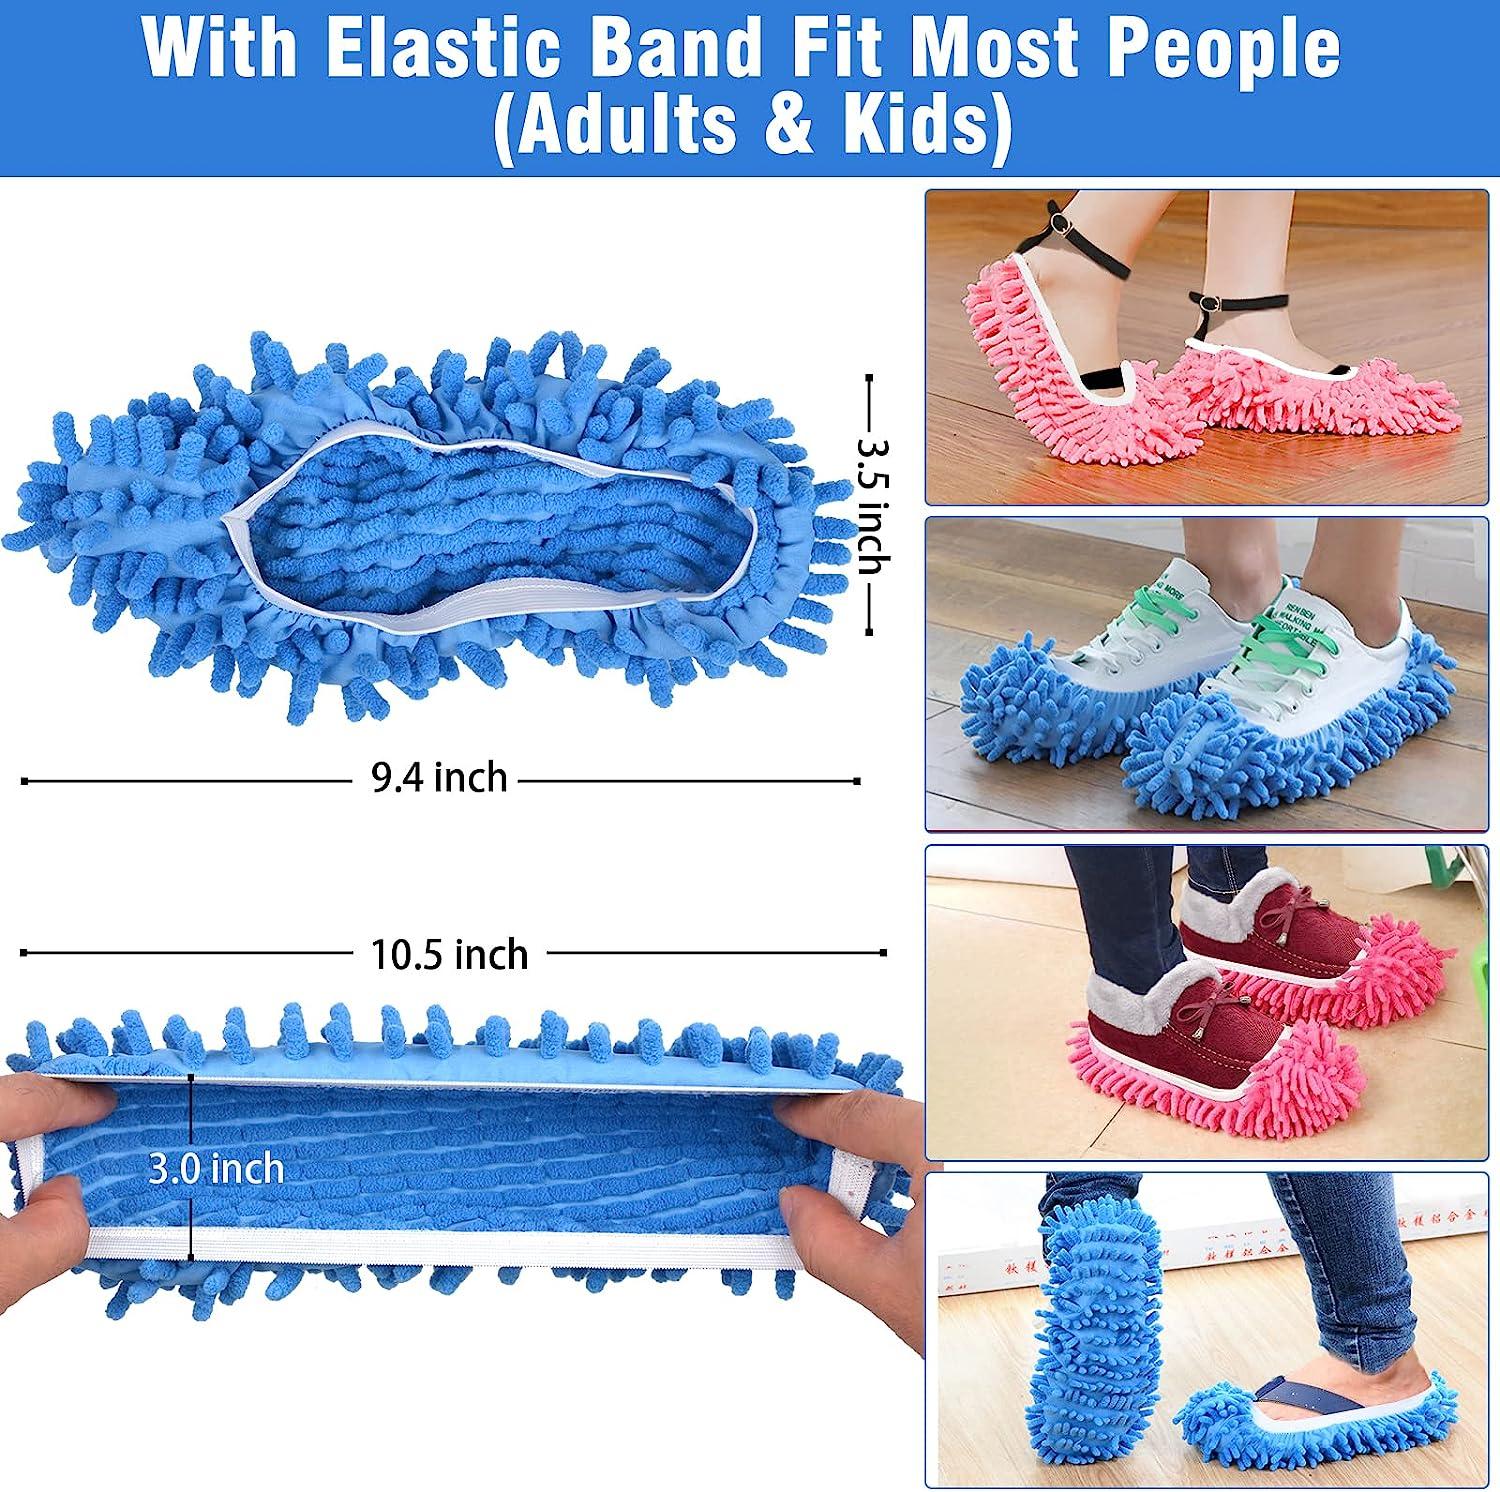 1 pair Washable Microfiber Dust Mop Slippers Lazy Quick Cleaning Floor  Cleaning Slipper Home Bathroom Cleanning Tools Home Shoes